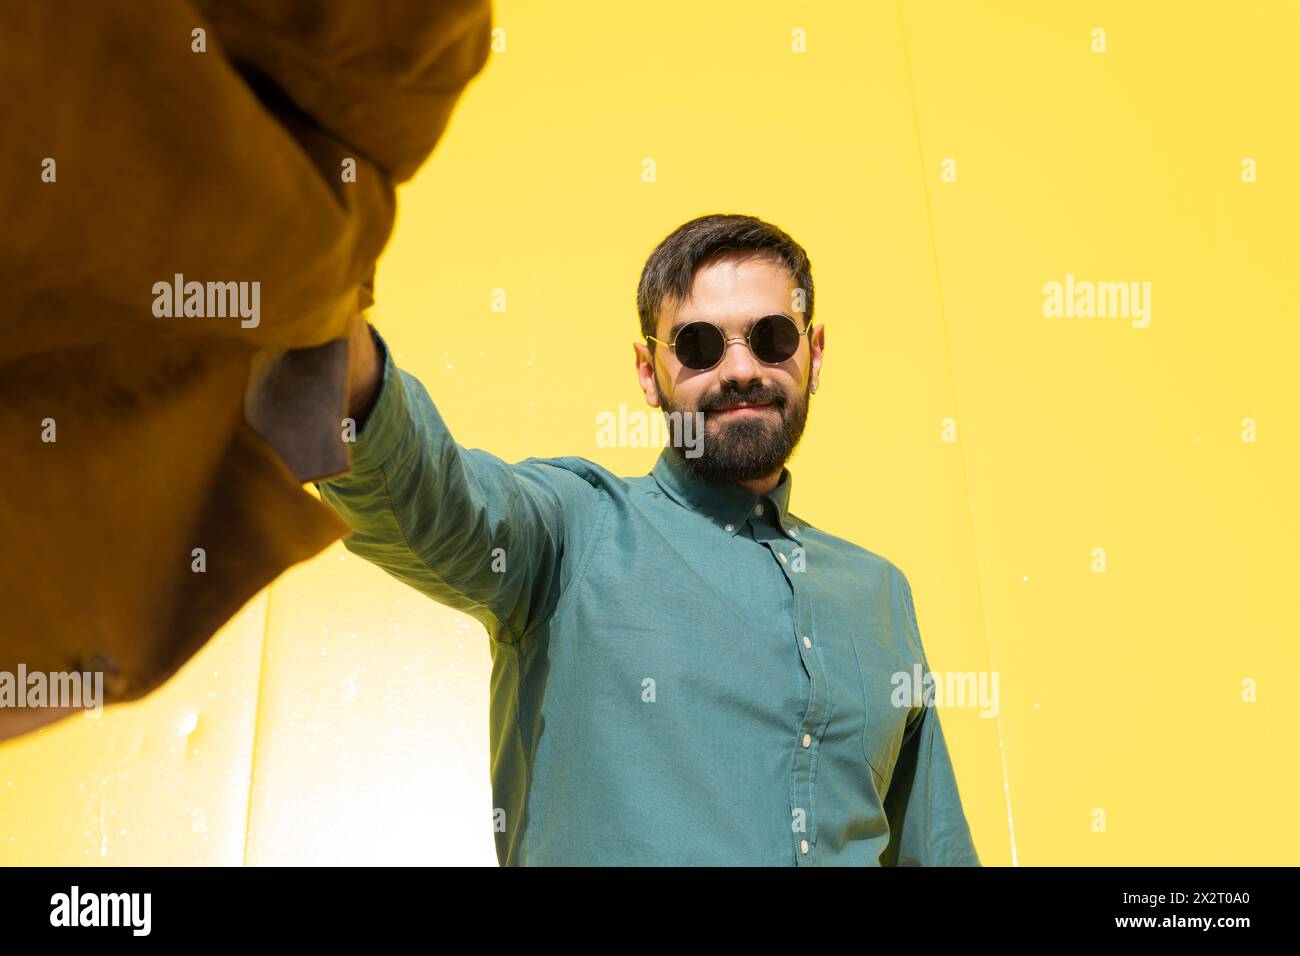 Smiling man wearing sunglasses and holding brown jacket Stock Photo